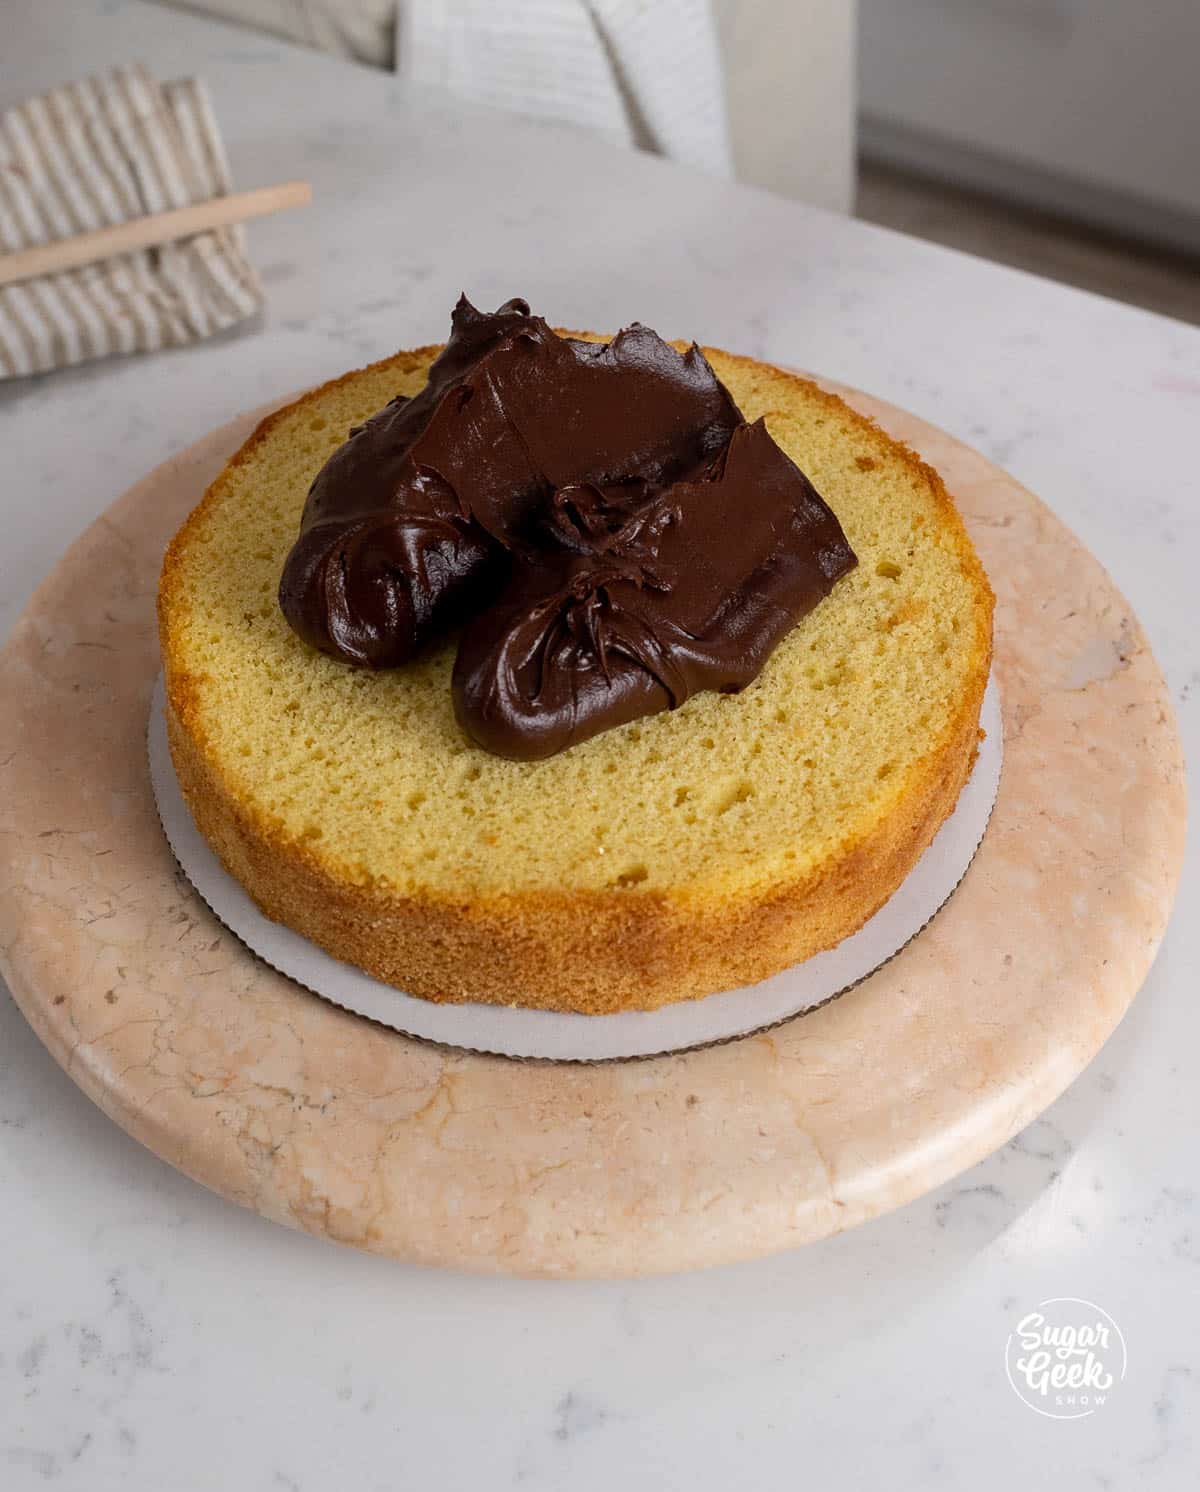 one layer of yellow cake with chocolate frosting on a cardboard round